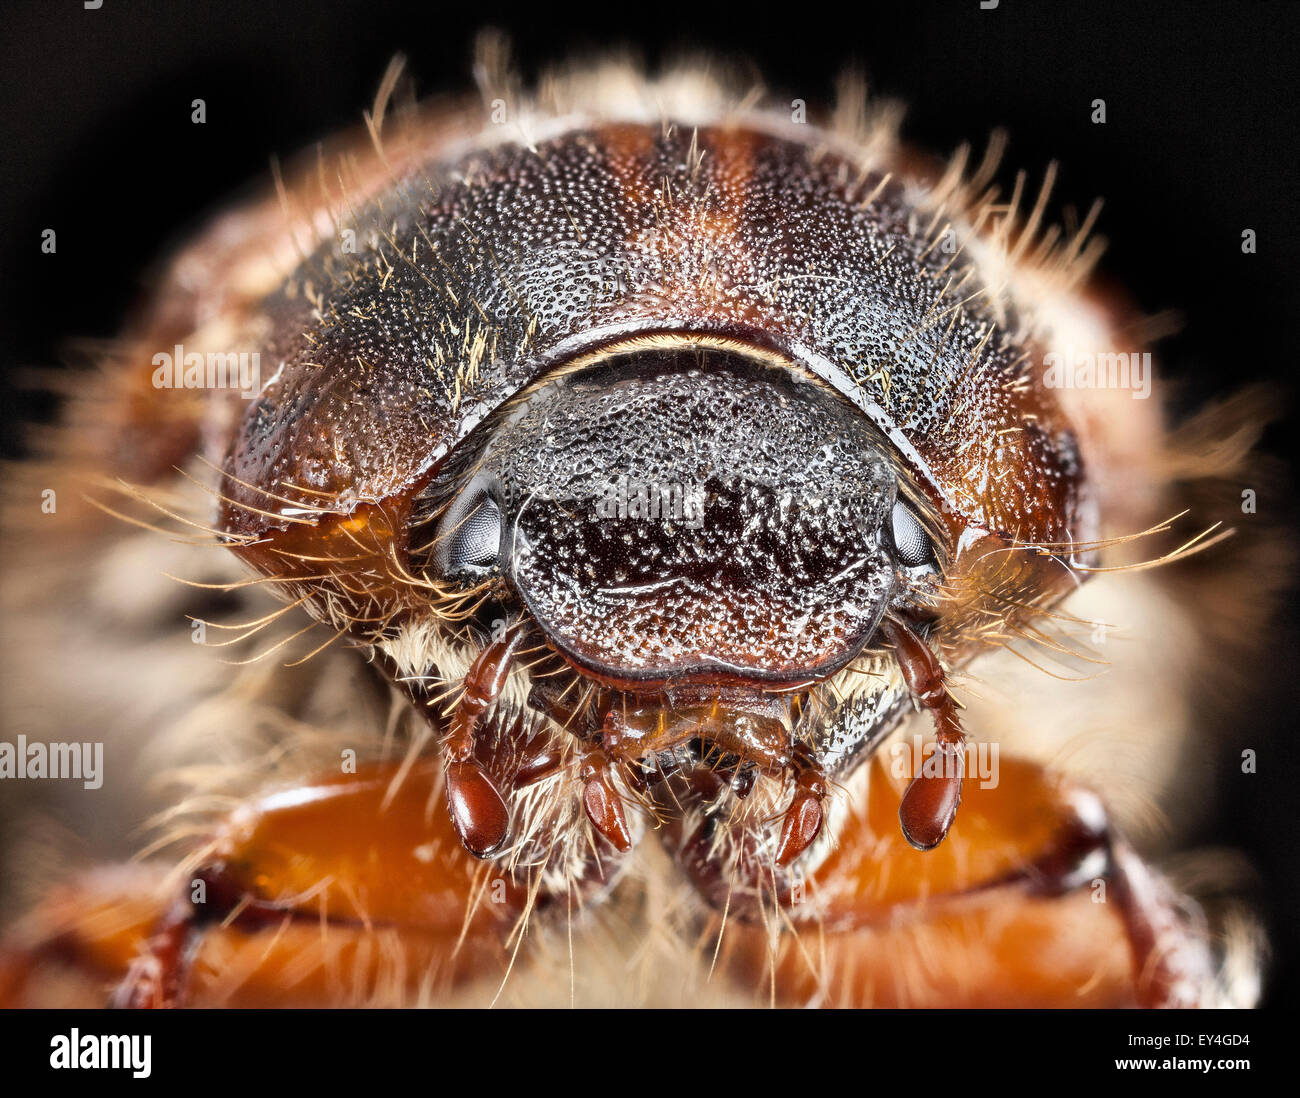 High macro image showing head of Amphimallon solstitiale, or summer chafer or European June beetle, Stock Photo